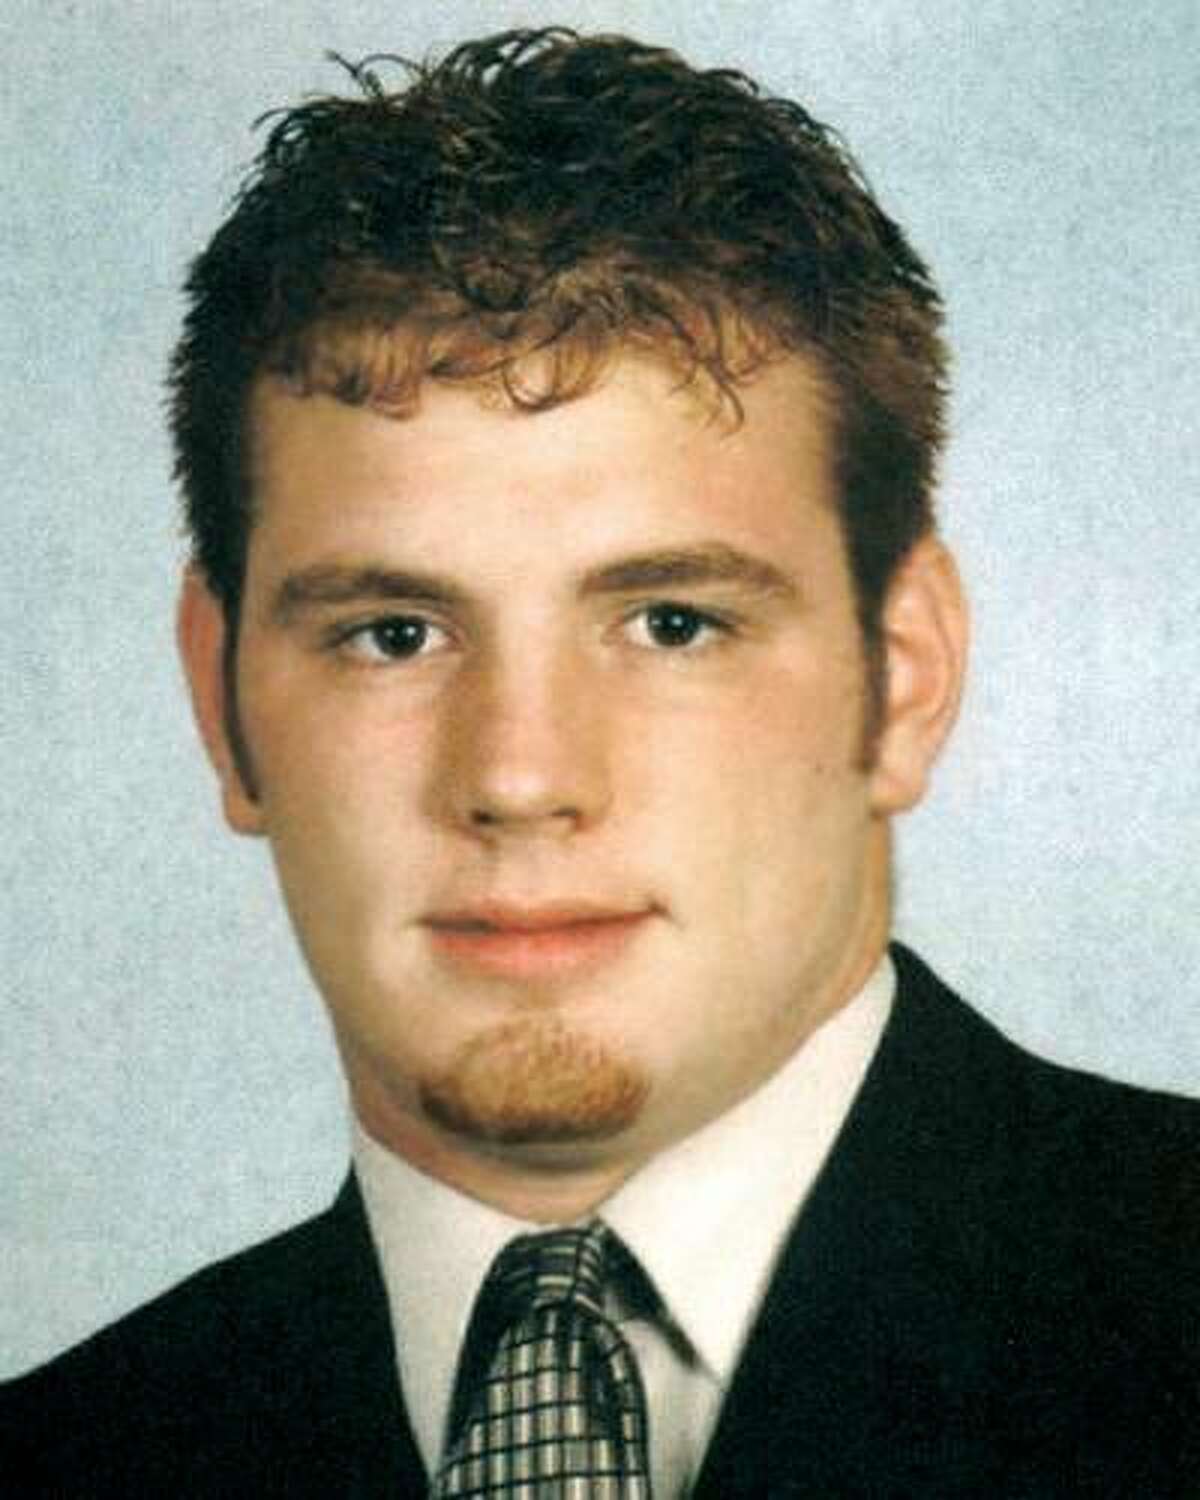 Craig Frear, a 17-year-old high schooler from Scotia-Glenville, disappeared June 27, 2004.